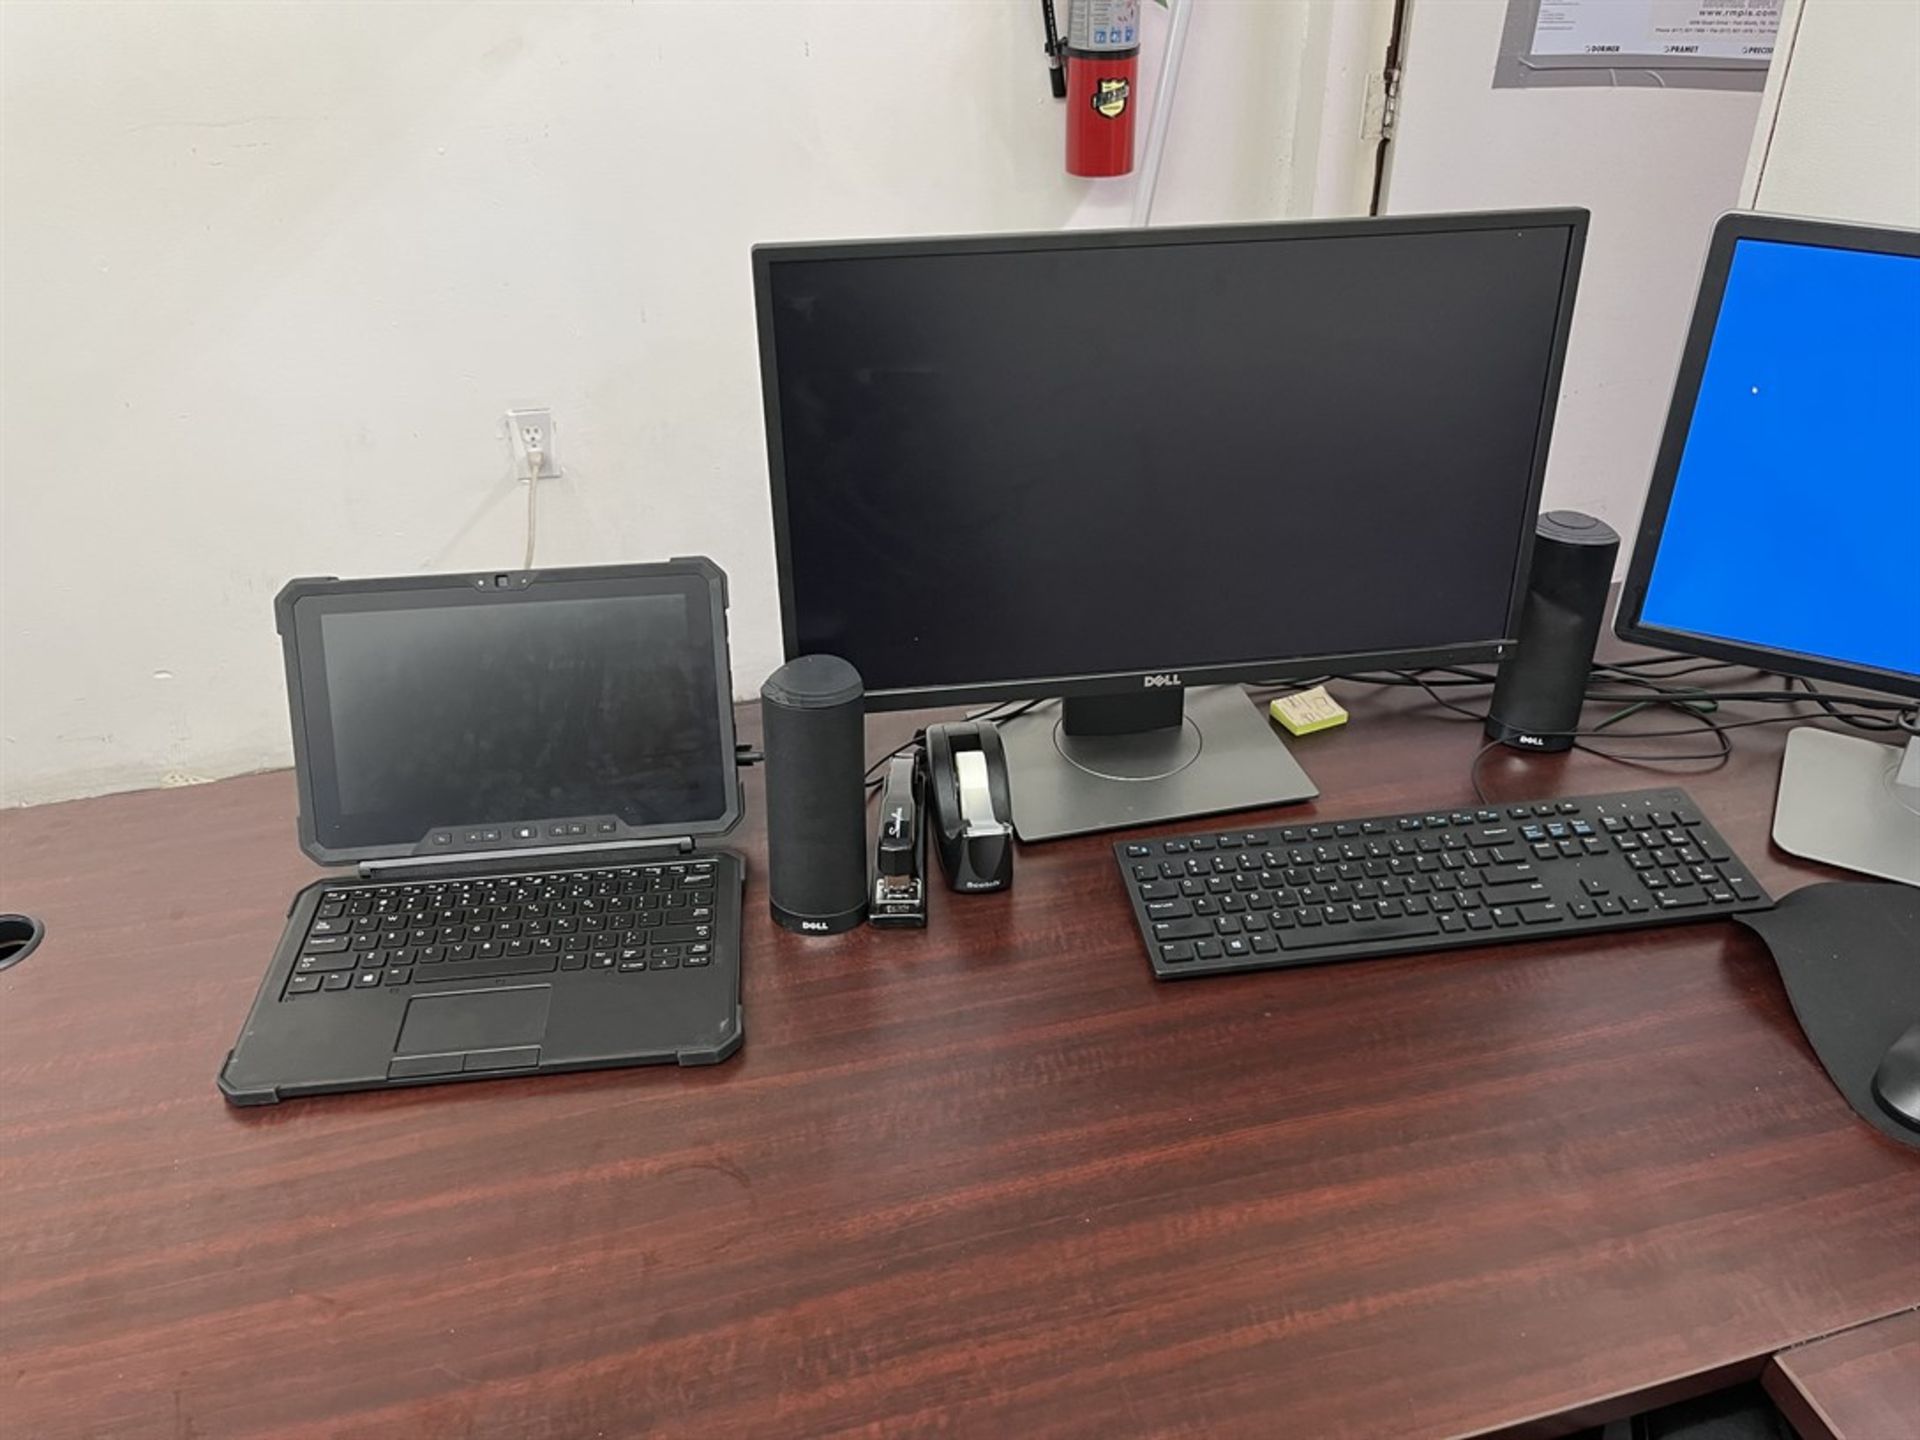 Lot consisting of Desk and (2) Monitors, (LAPTOPS NOT INCLUDED) - Image 3 of 3